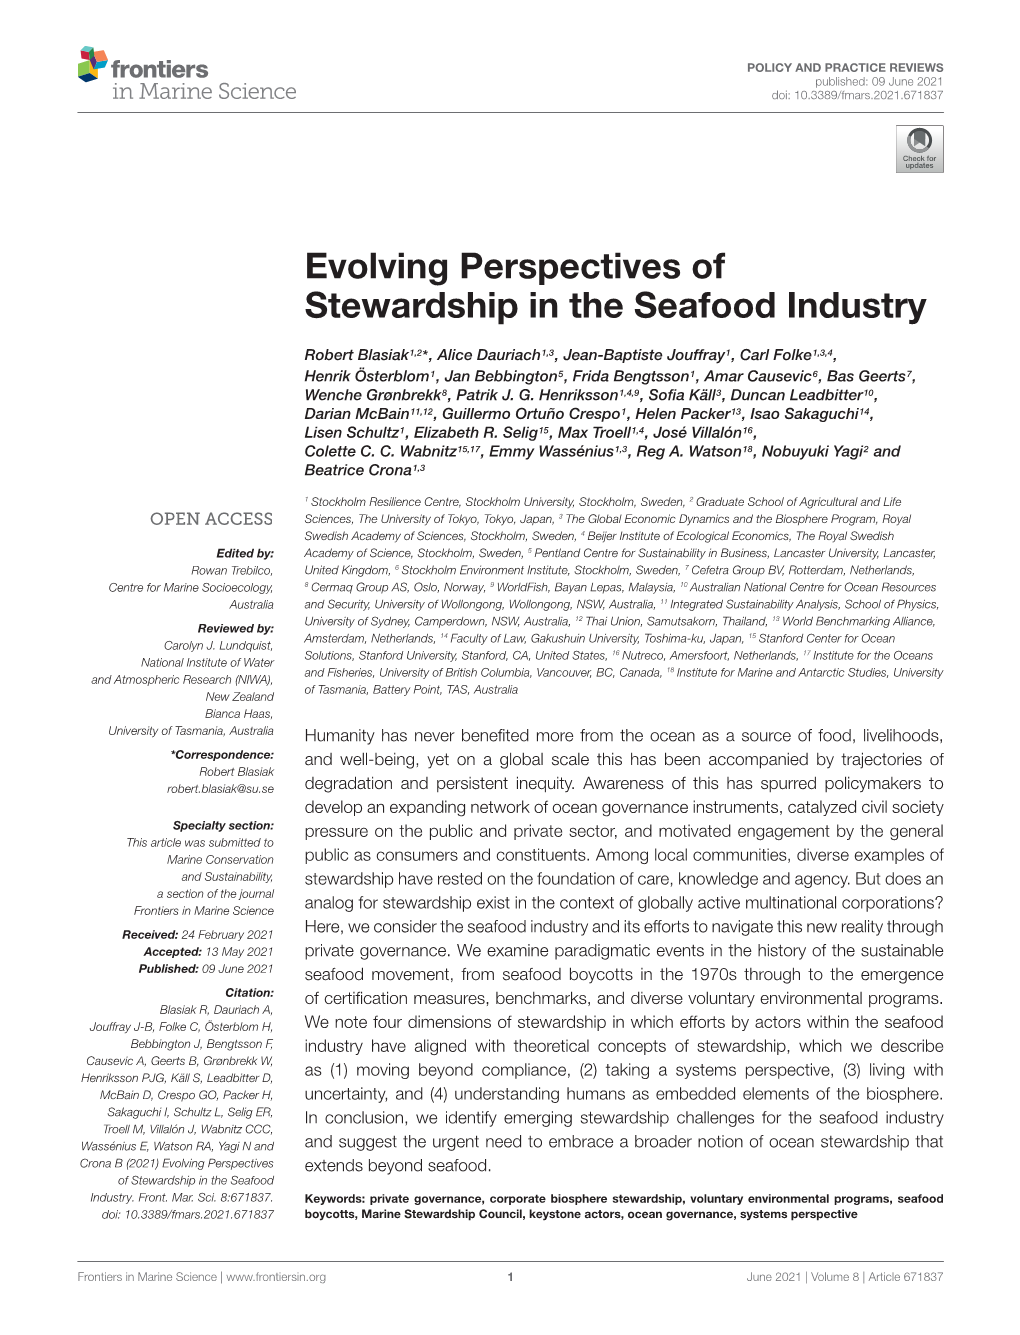 Evolving Perspectives of Stewardship in the Seafood Industry